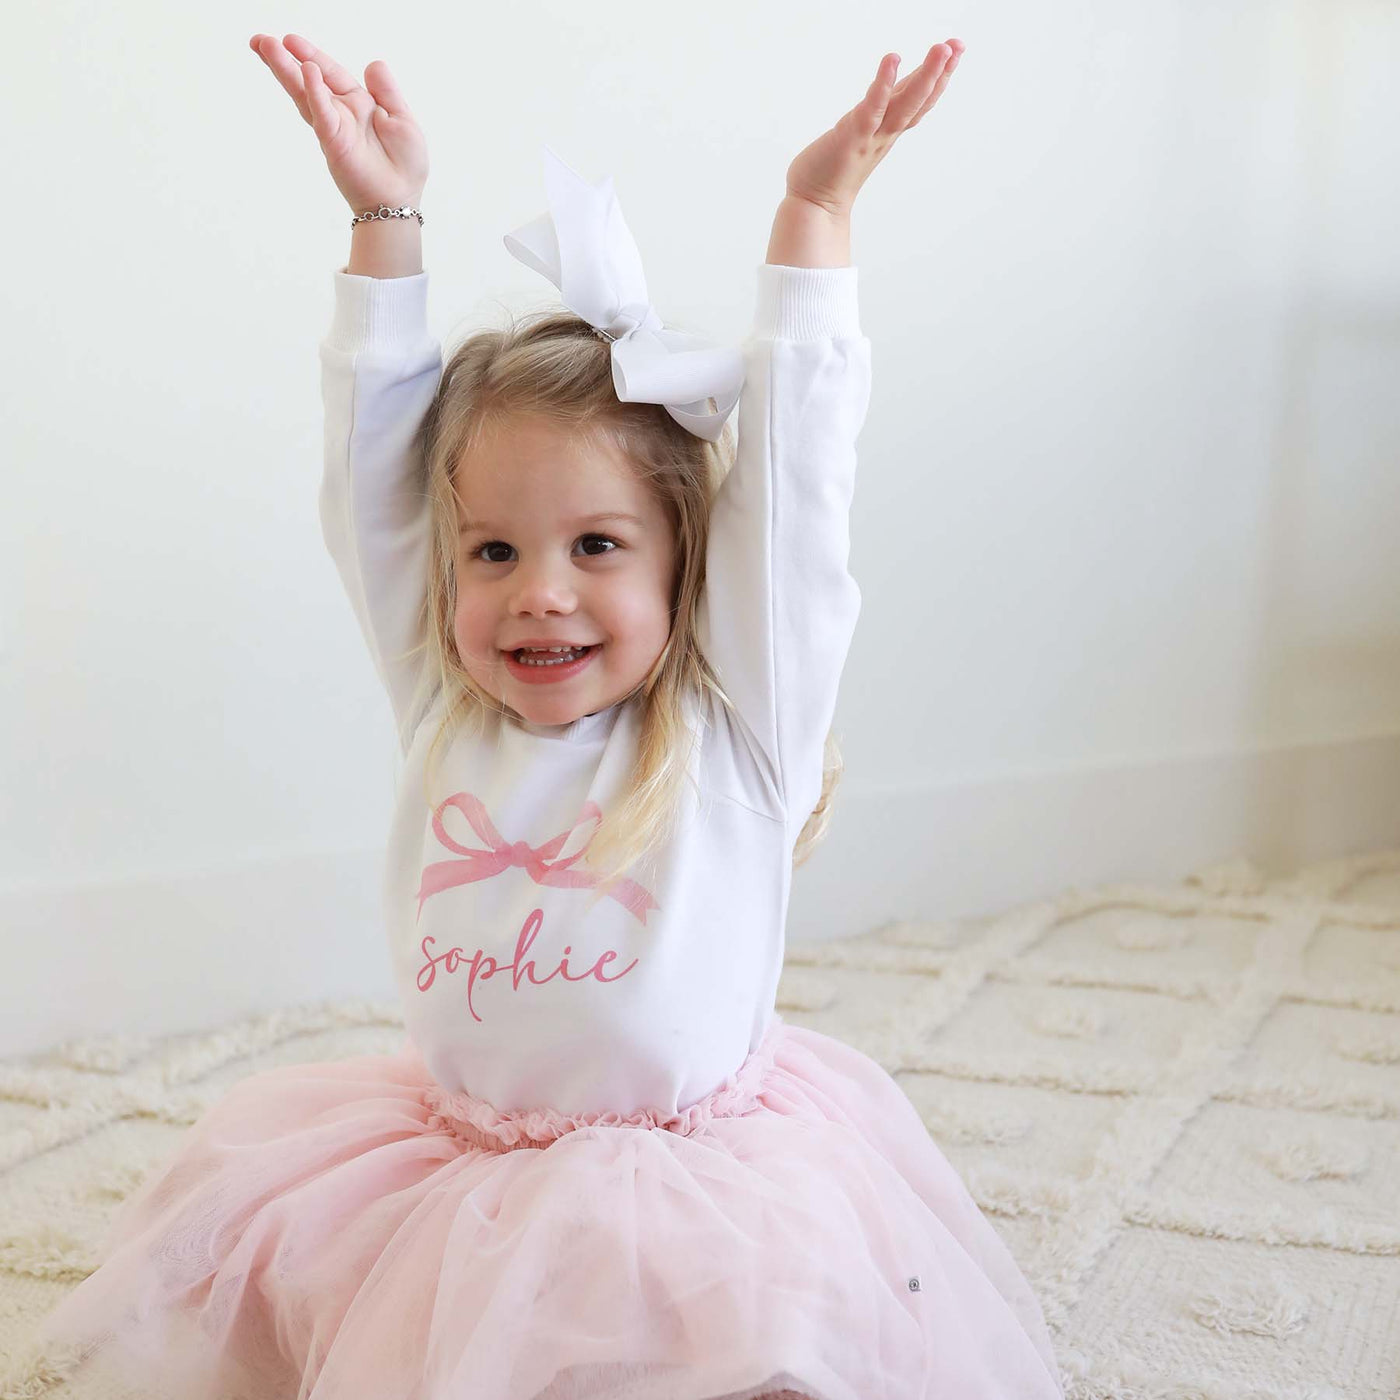 white sweatshirt for kids with pink bow personalized with name 